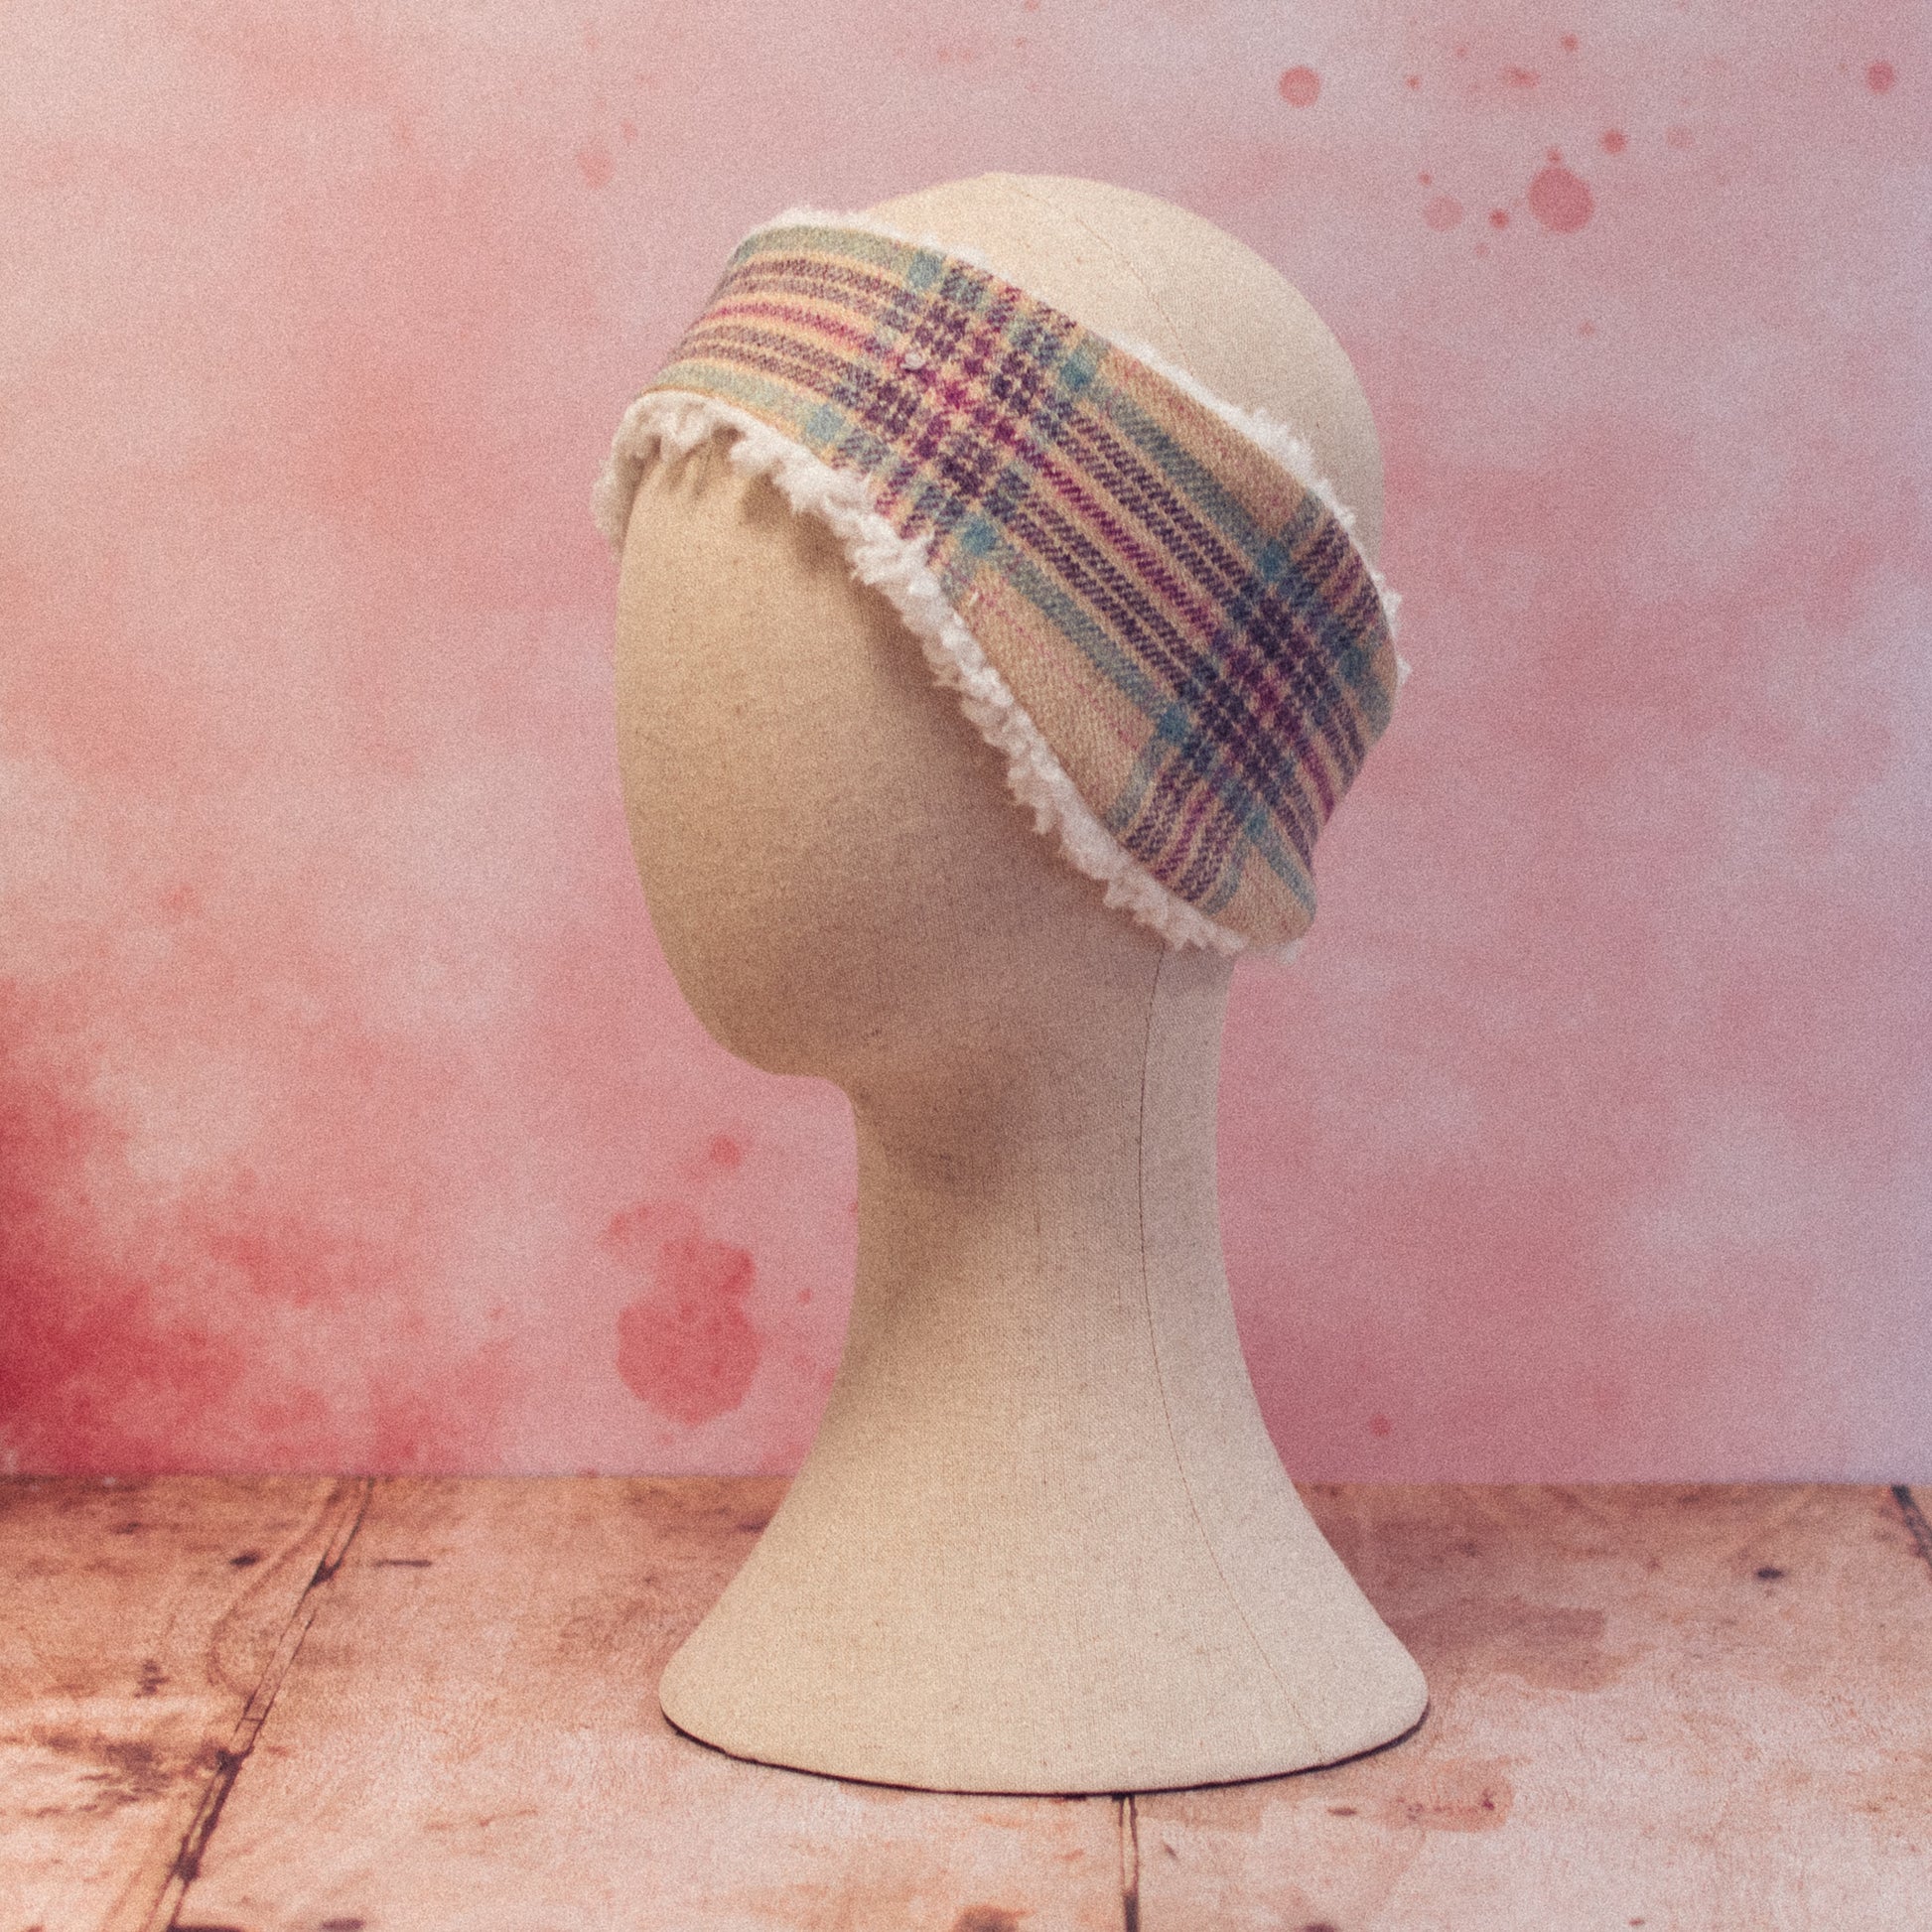 F&B crafts linnet tweed headwarmer featuring cream, light blue, pink and purple check